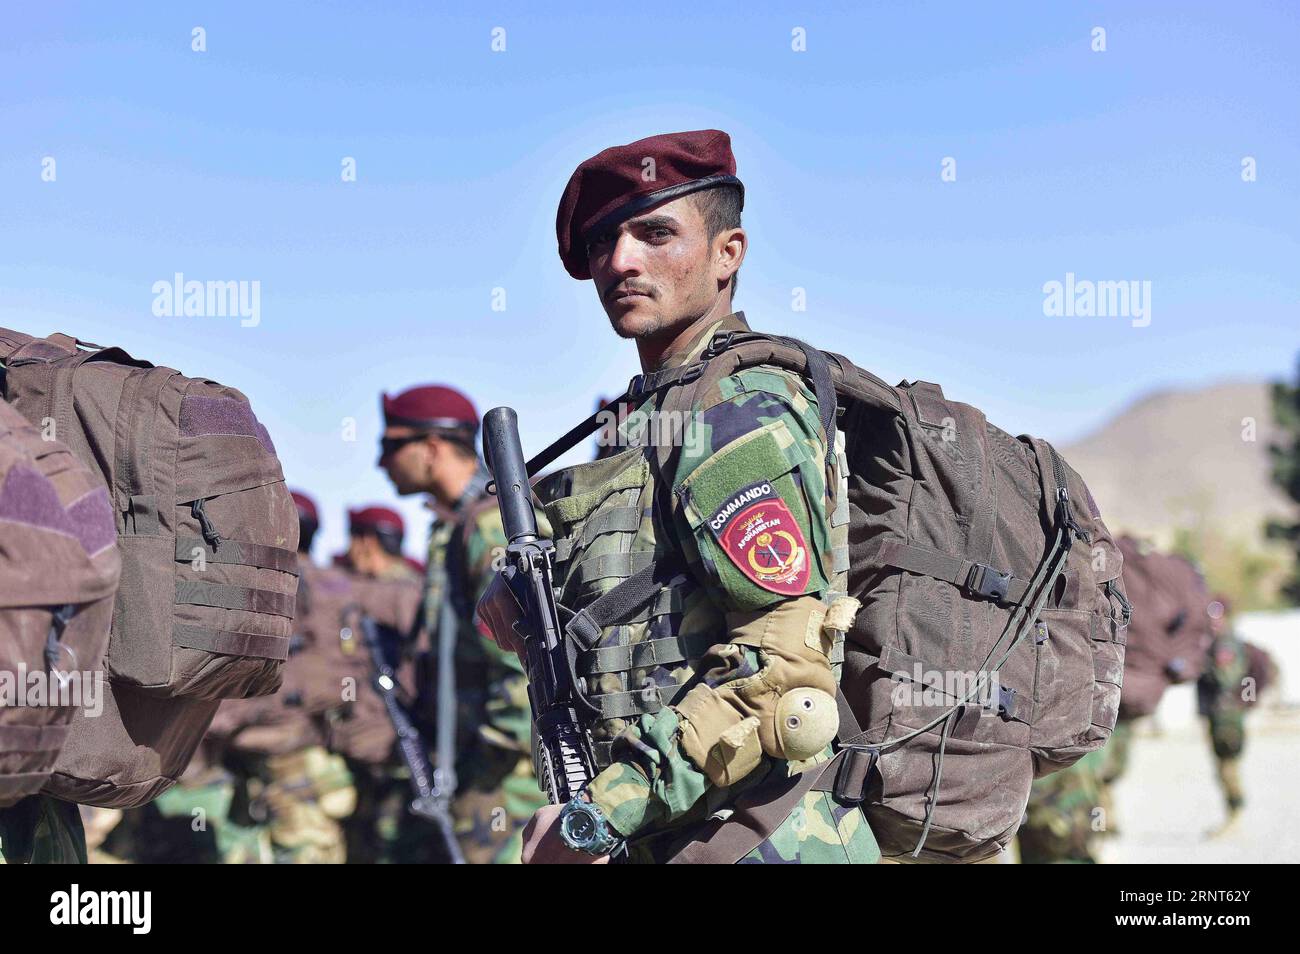 (171031) -- KABUL, Oct. 31, 2017 -- A commando soldier waits to receive an inspection at Morehead Commando Training Center, near Kabul, Afghanistan, on Oct. 25, 2017. A total of 830 commandos after completion of a 14-week training course were commissioned to Afghan National Army (ANA) recently. ) (psw) AFGHANISTAN-KABUL-MOREHEAD COMMANDO TRAINING CENTER DaixHe PUBLICATIONxNOTxINxCHN Stock Photo